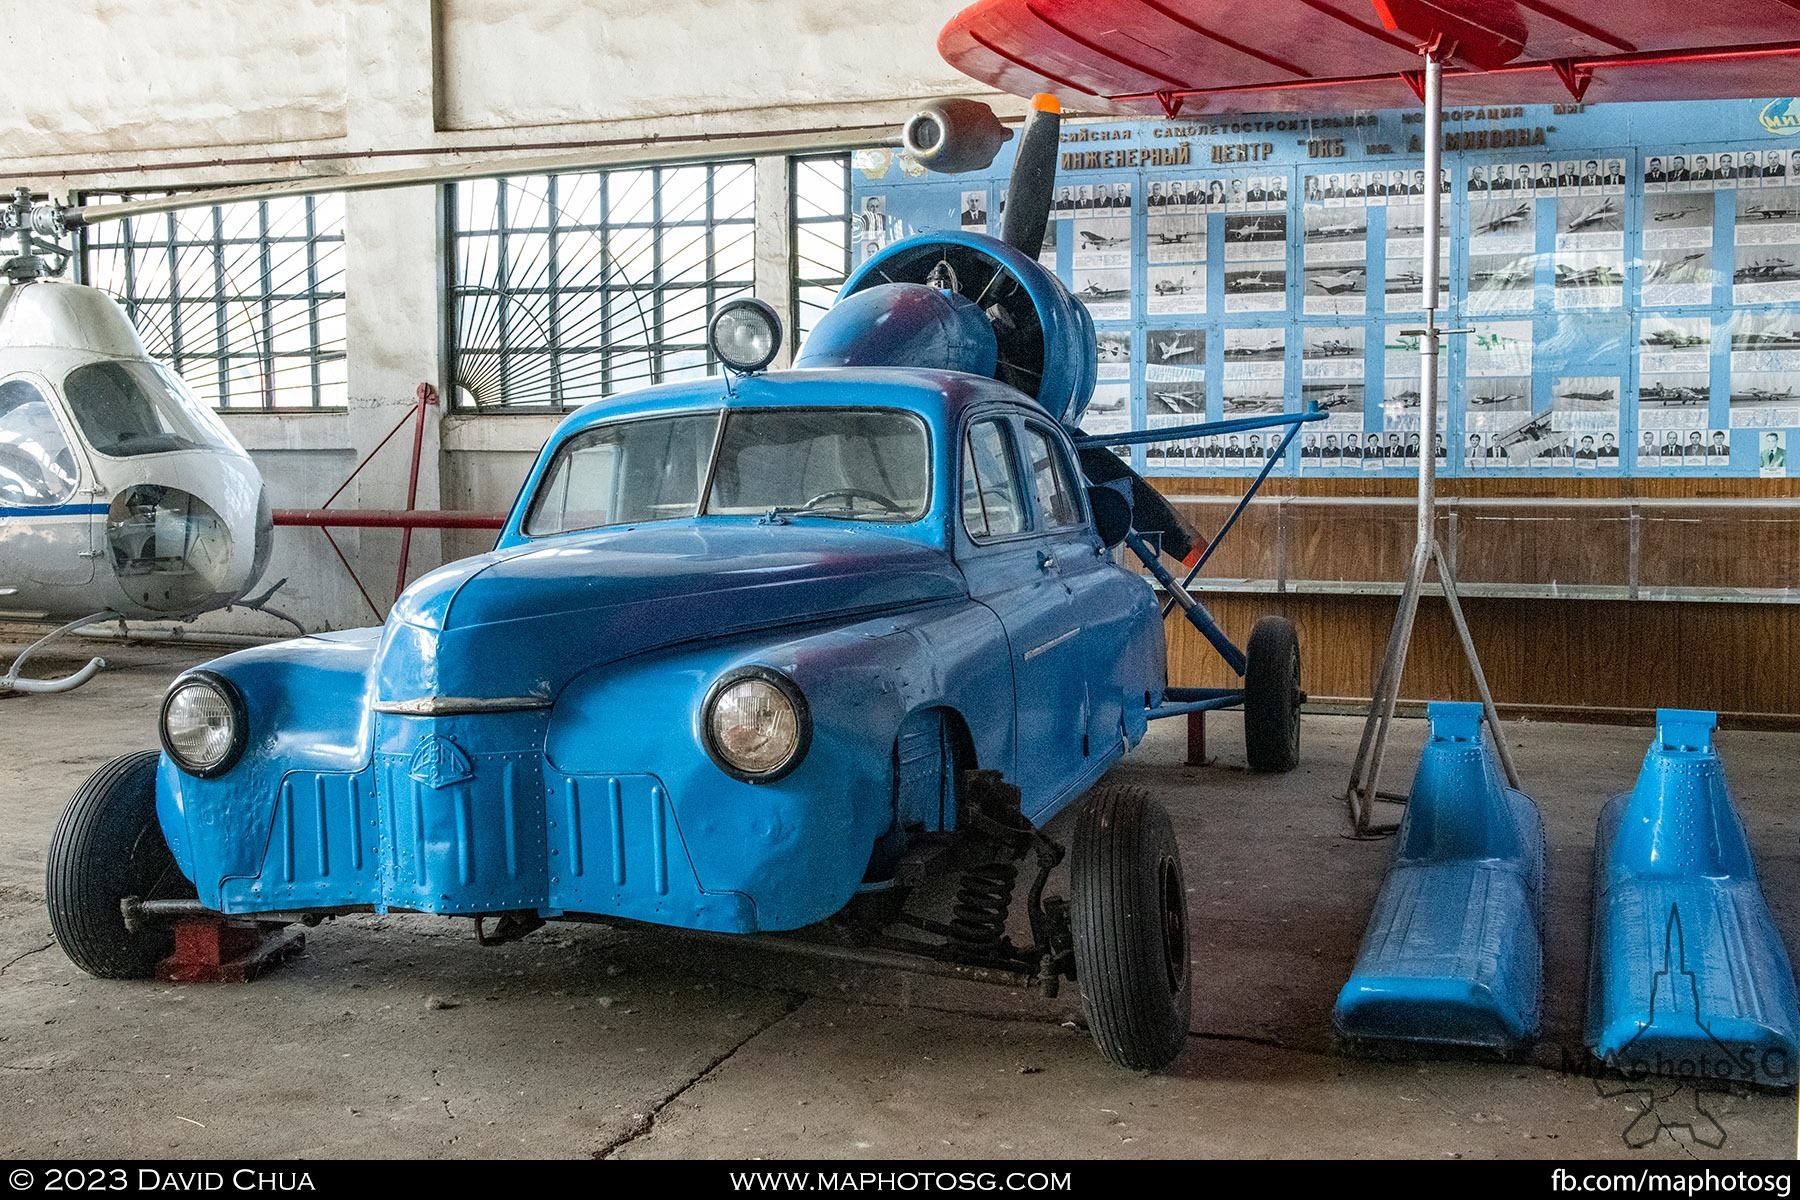 North-2 Snowmobile. It is a Pobeda car powered with an AI-14 aviation engine and equipped with skis.